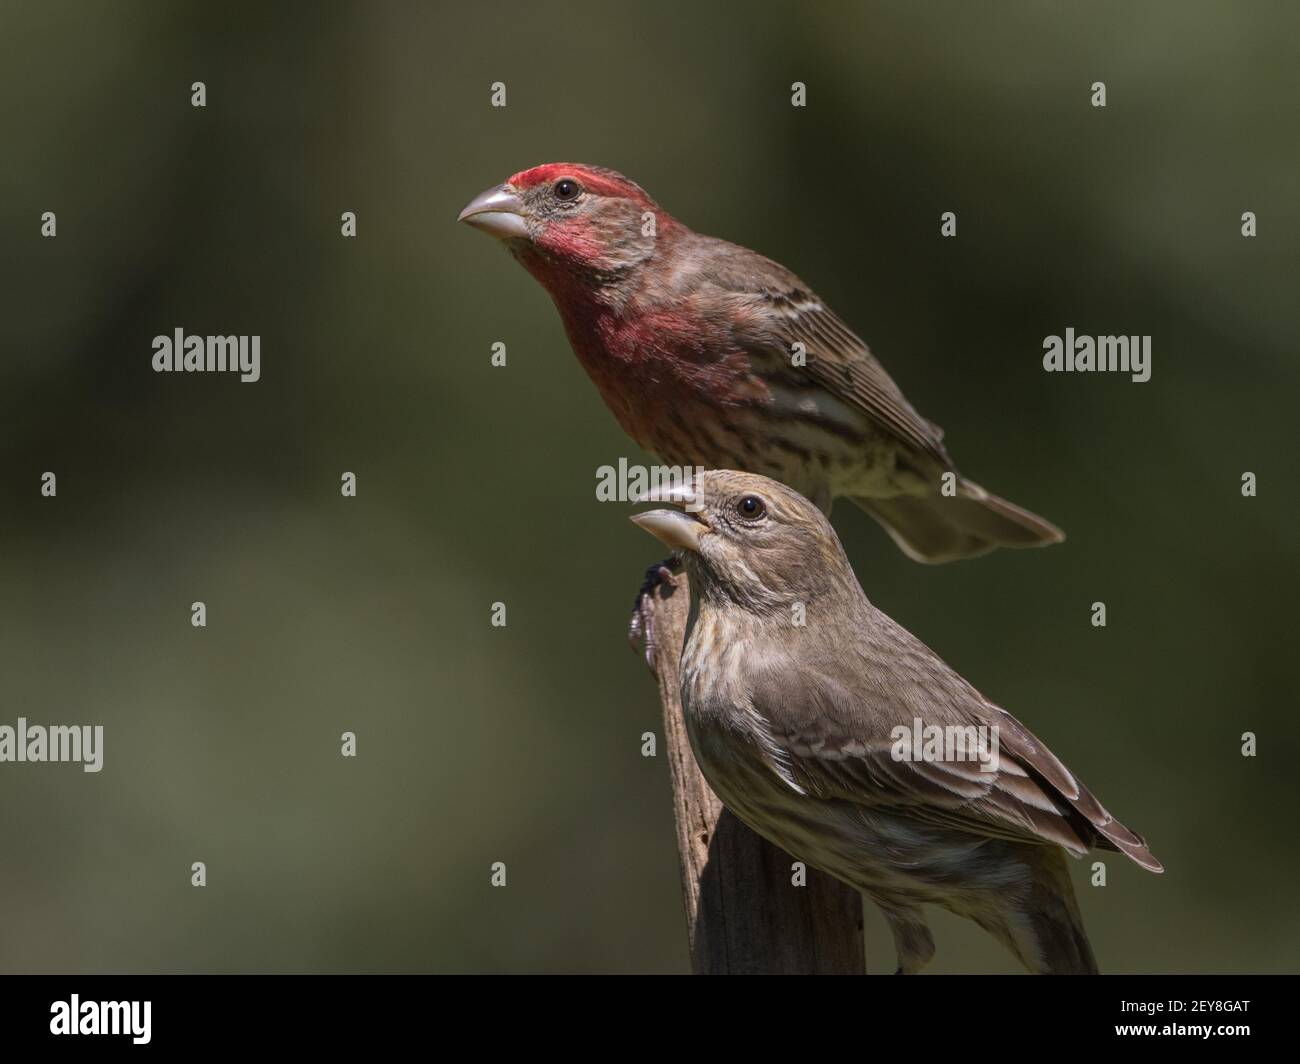 A pair of house finches, Haemorhous mexicanus. Stock Photo